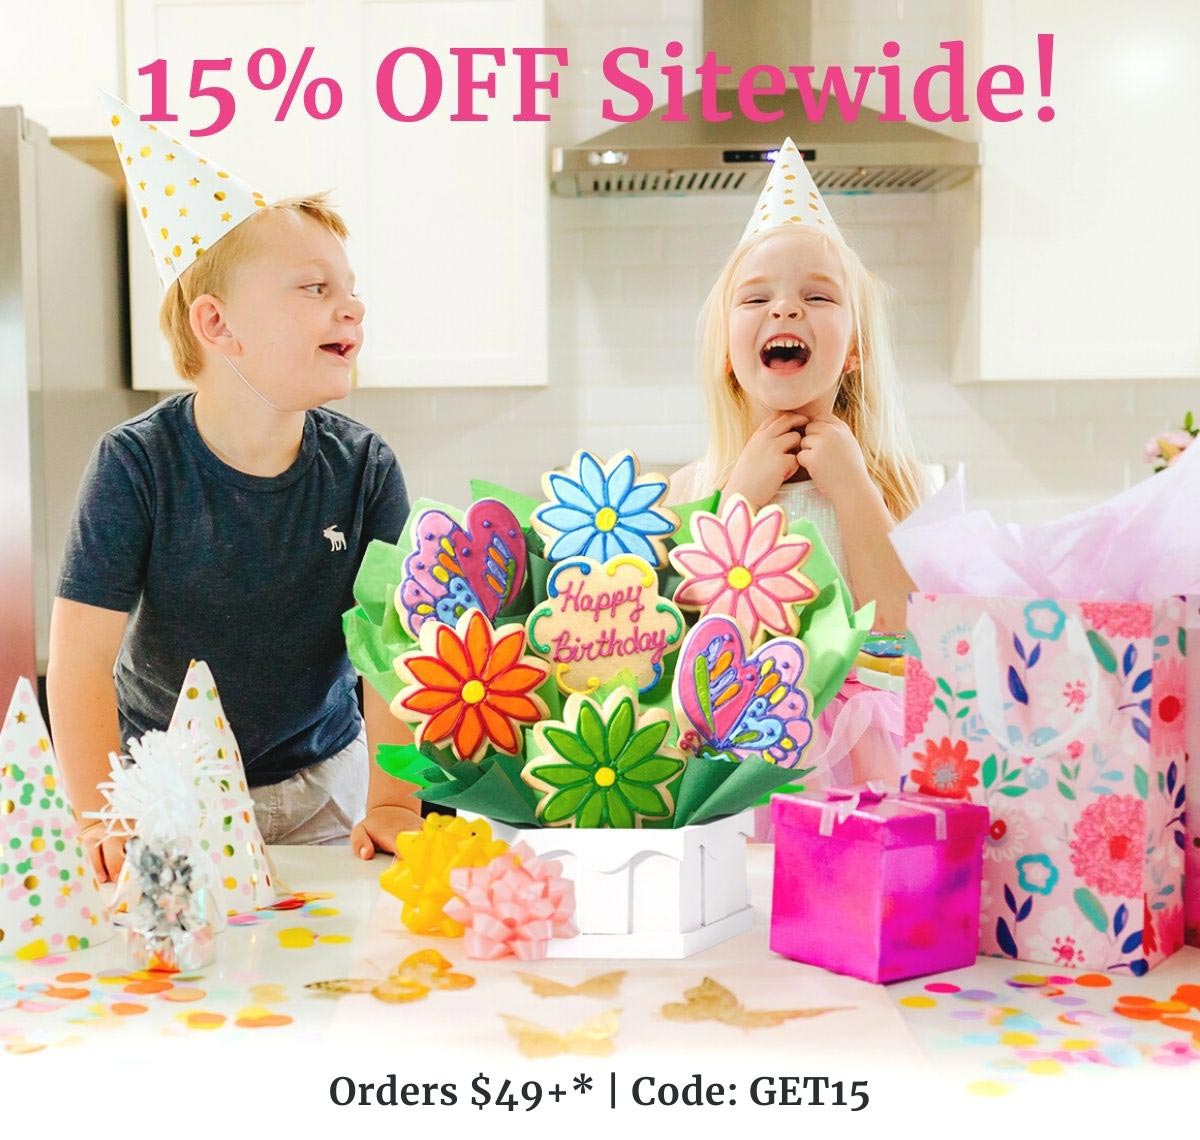 celebrate Sitewide Offer